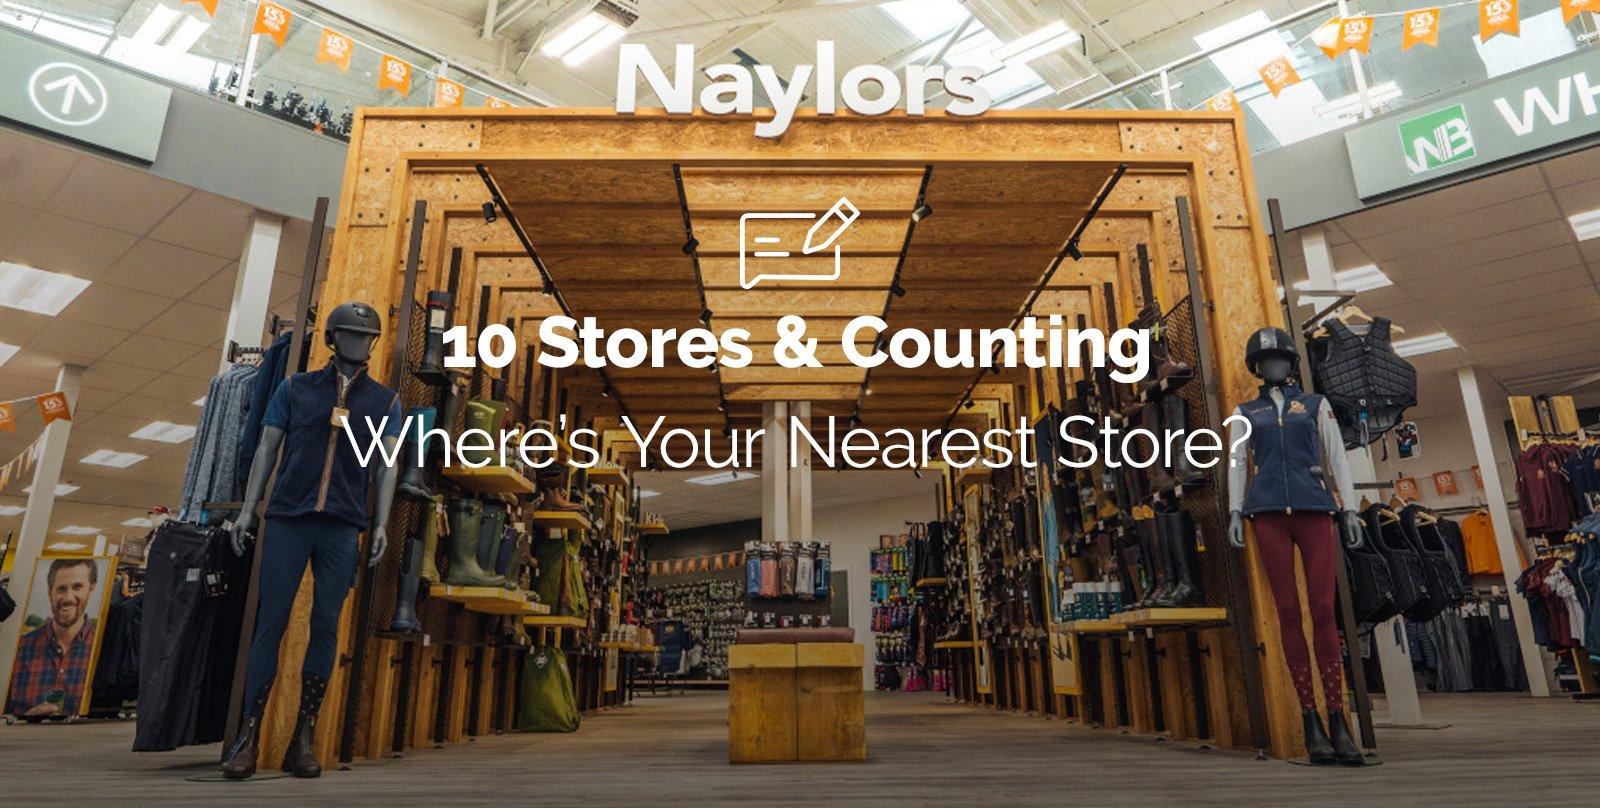 10 Stores & Counting